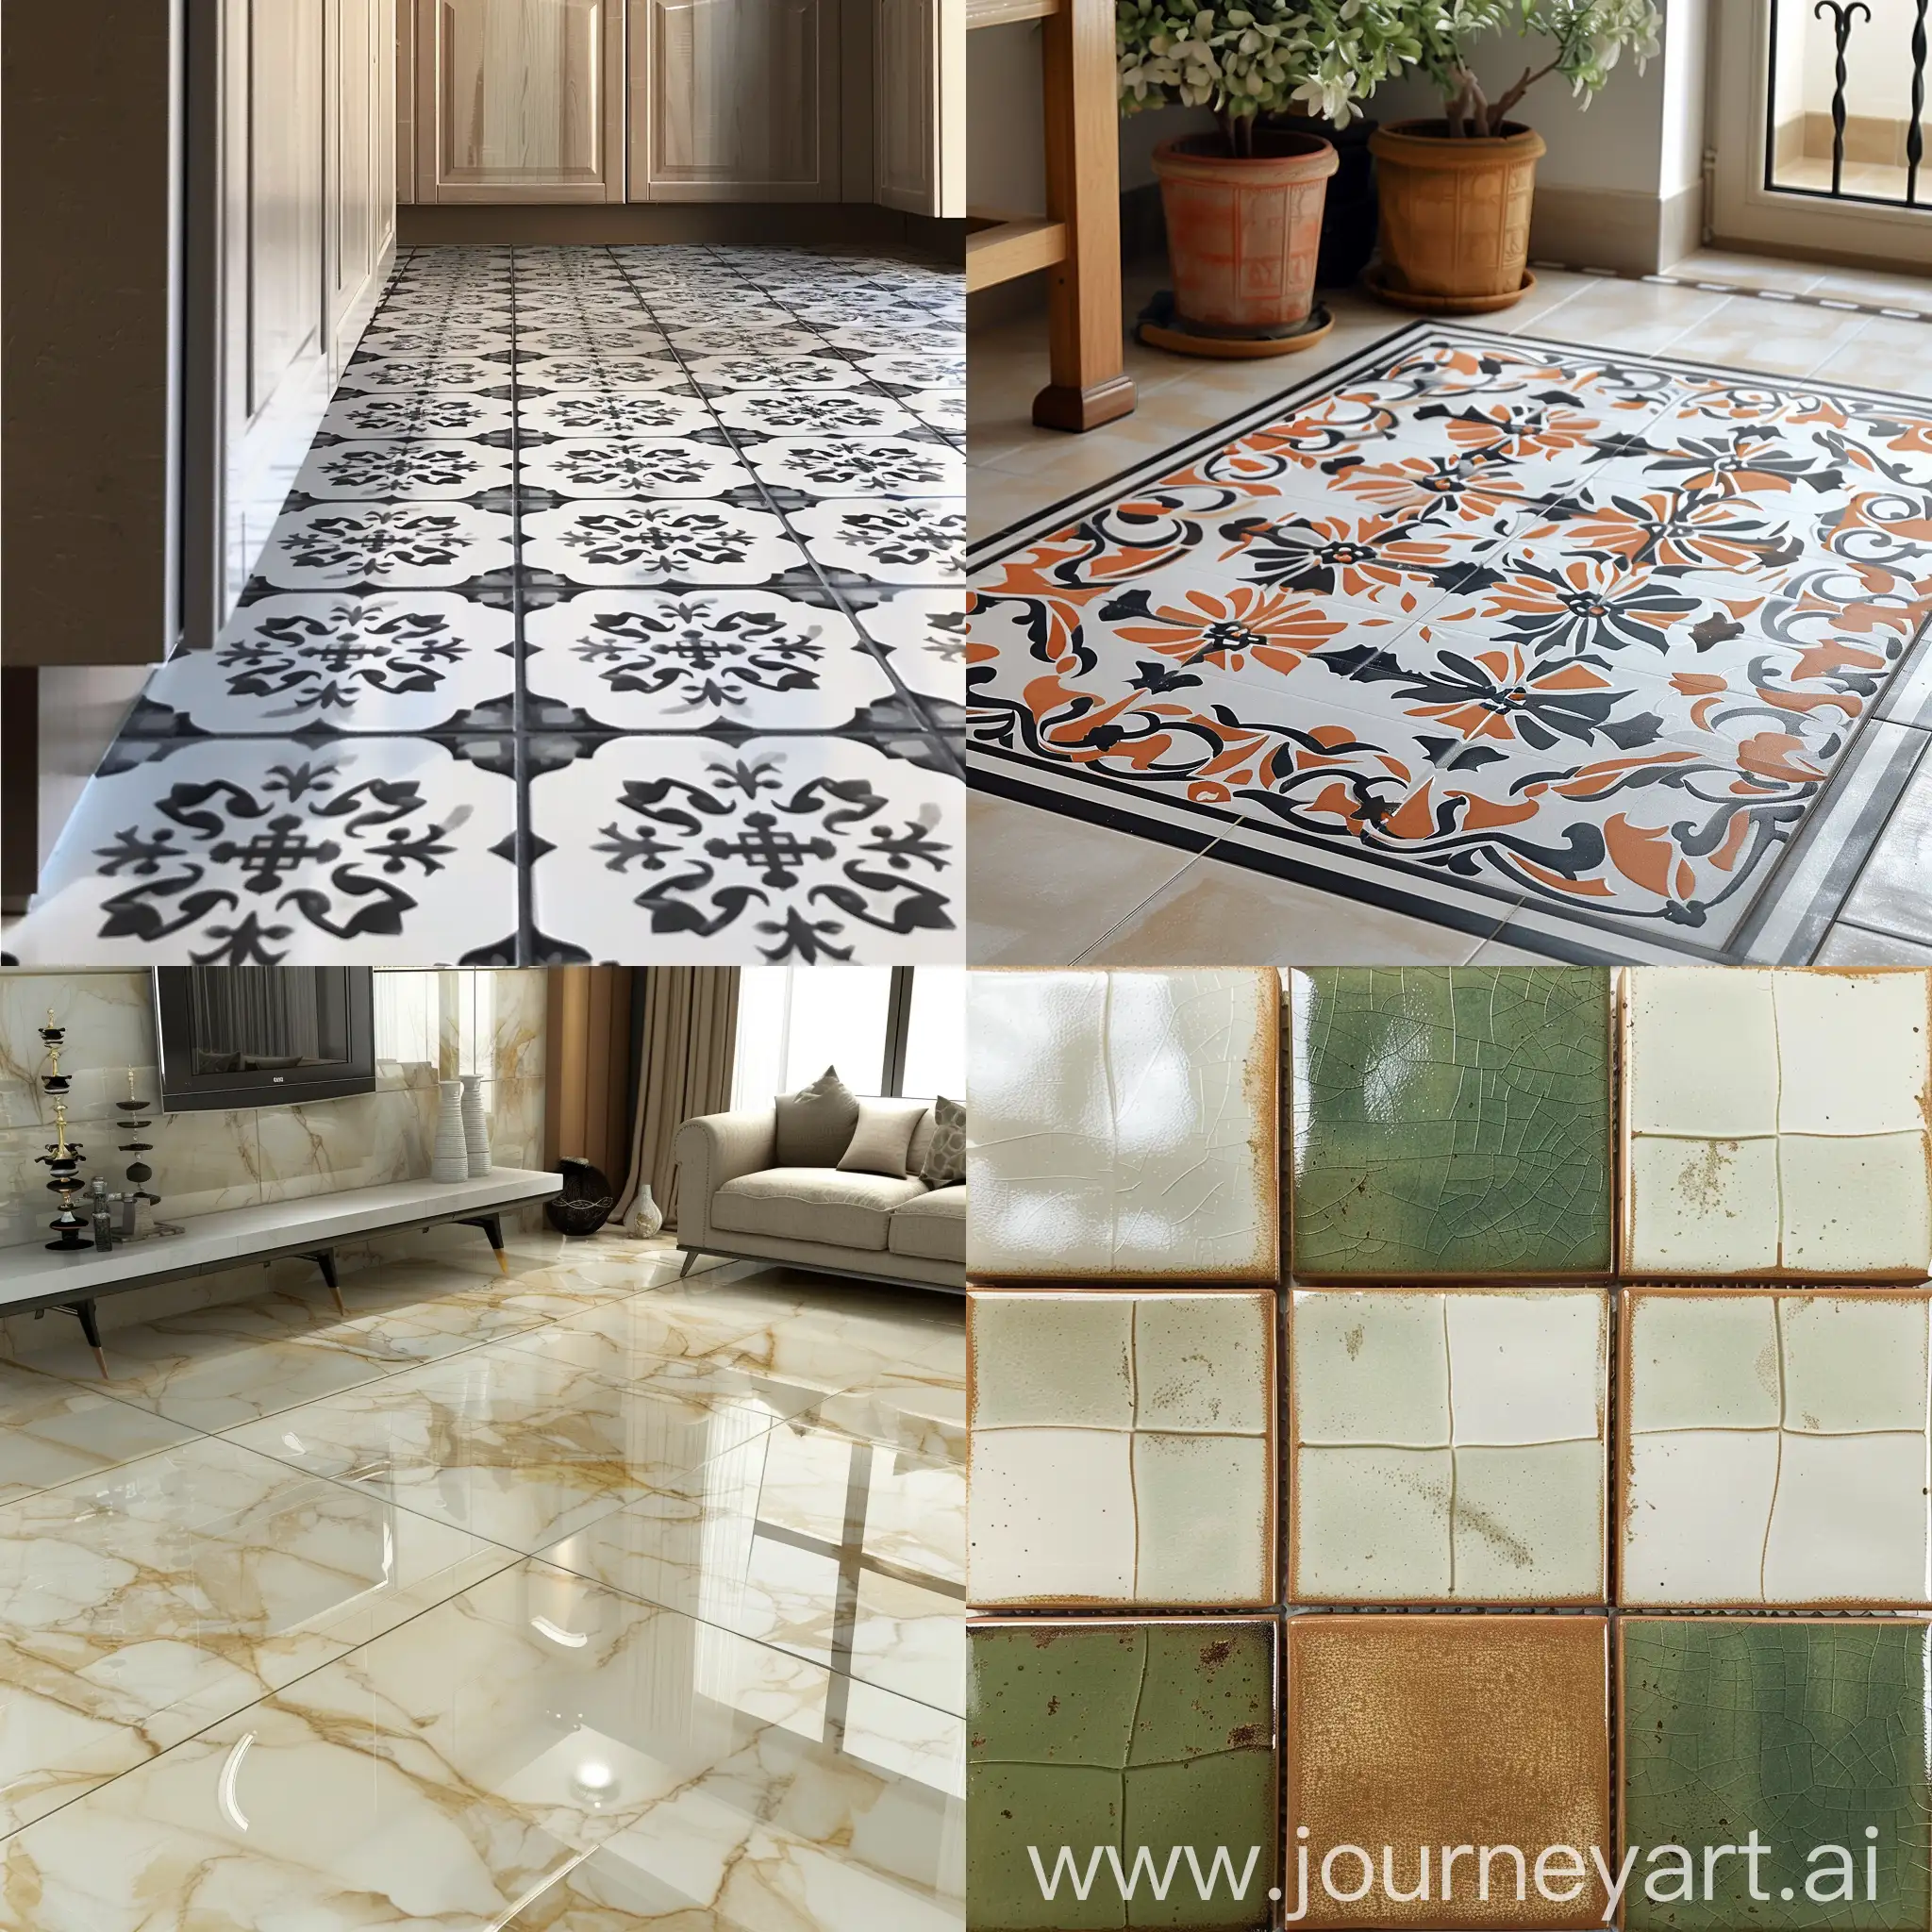 Give me some photos of beautiful, clean and new ceramic tiles